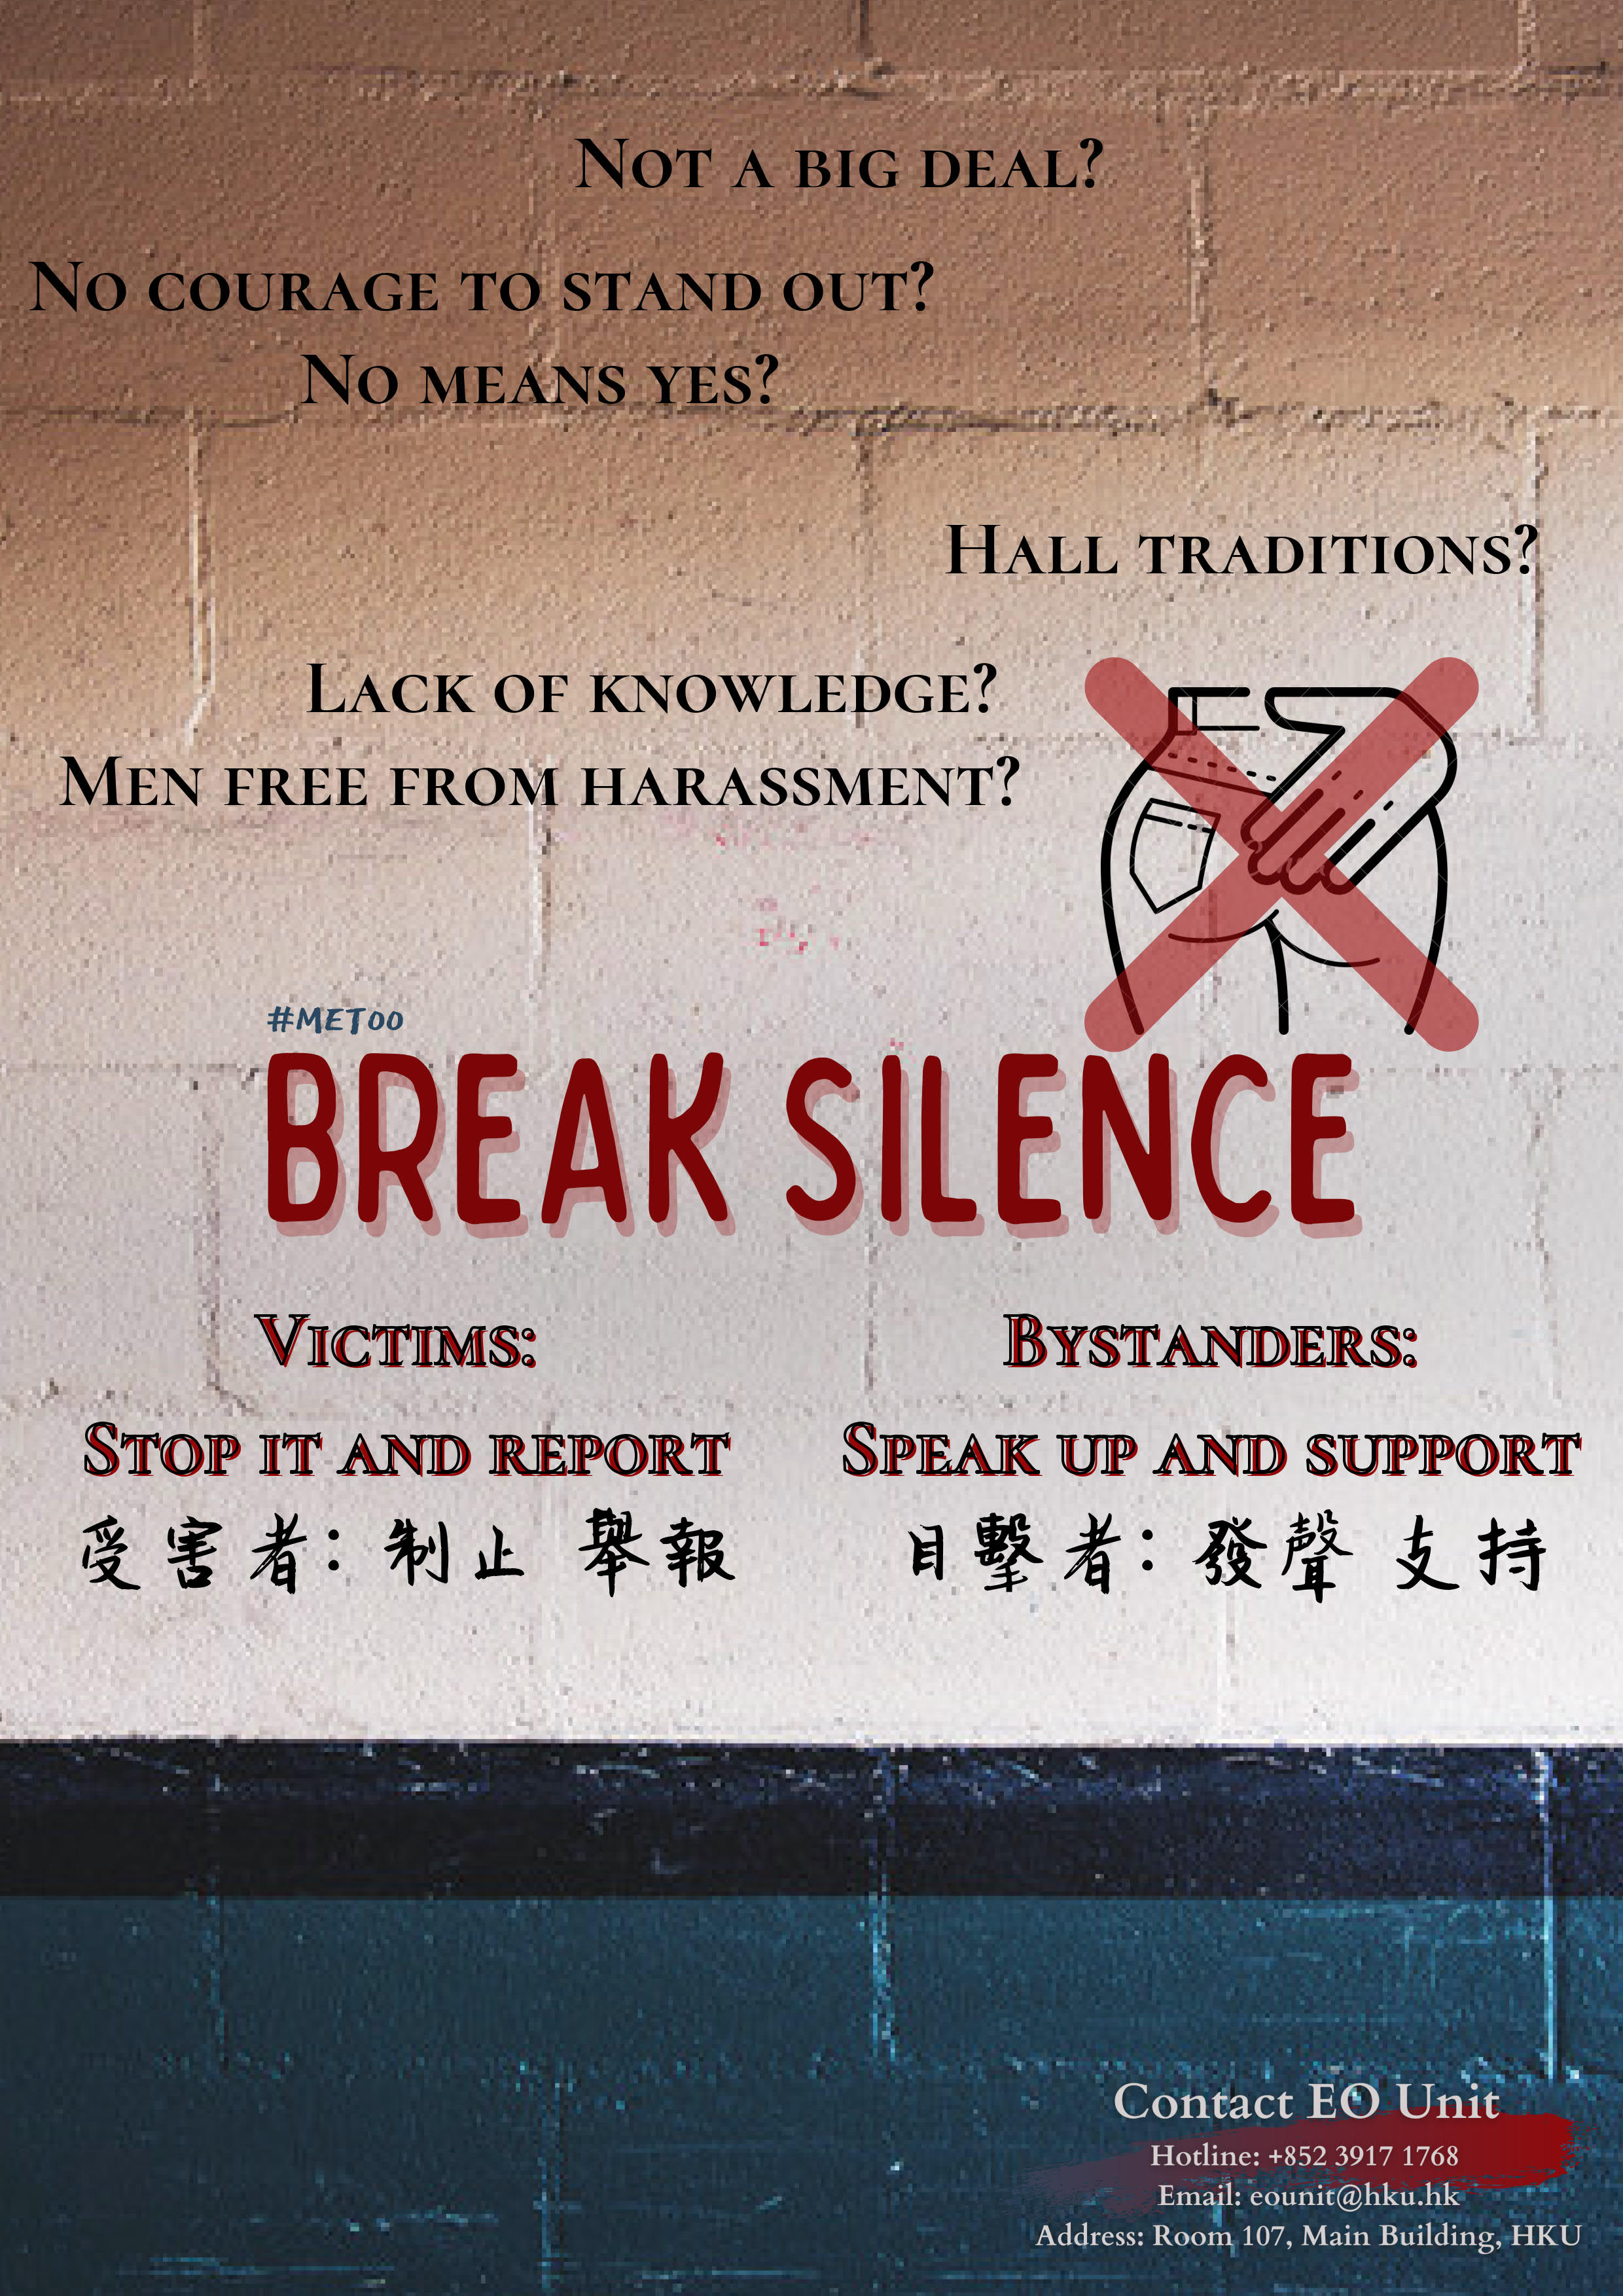 The poster starts from some common misconceptions to direct people to ponder whether they treat sexual harassment properly. In the middle of the poster is the theme and solution that I would like to address and emphasize. There are mainly two parties who can jointly contribute to sexual harassment prevention, where the most important content was pointed out with Chinese translation to expand its targeted audience at the first glance. It is also crucial to provide path for them to report or lodge complaint (which facilitates university a better picture of related issues), which is indicated at the bottom as a reference.  I care about the topic a lot for a long time. It is because I myself has encountered improper sexual suggestive behavior before since my primary school. I am glad things get better in Hong Kong, where I receive more respect. However, I hear peers’ pressure from hall orientation or similar activities involving sexual harassment. As an EOSA and also a university student, I feel obliged to encourage a sexual harassment free environment for people to live in.